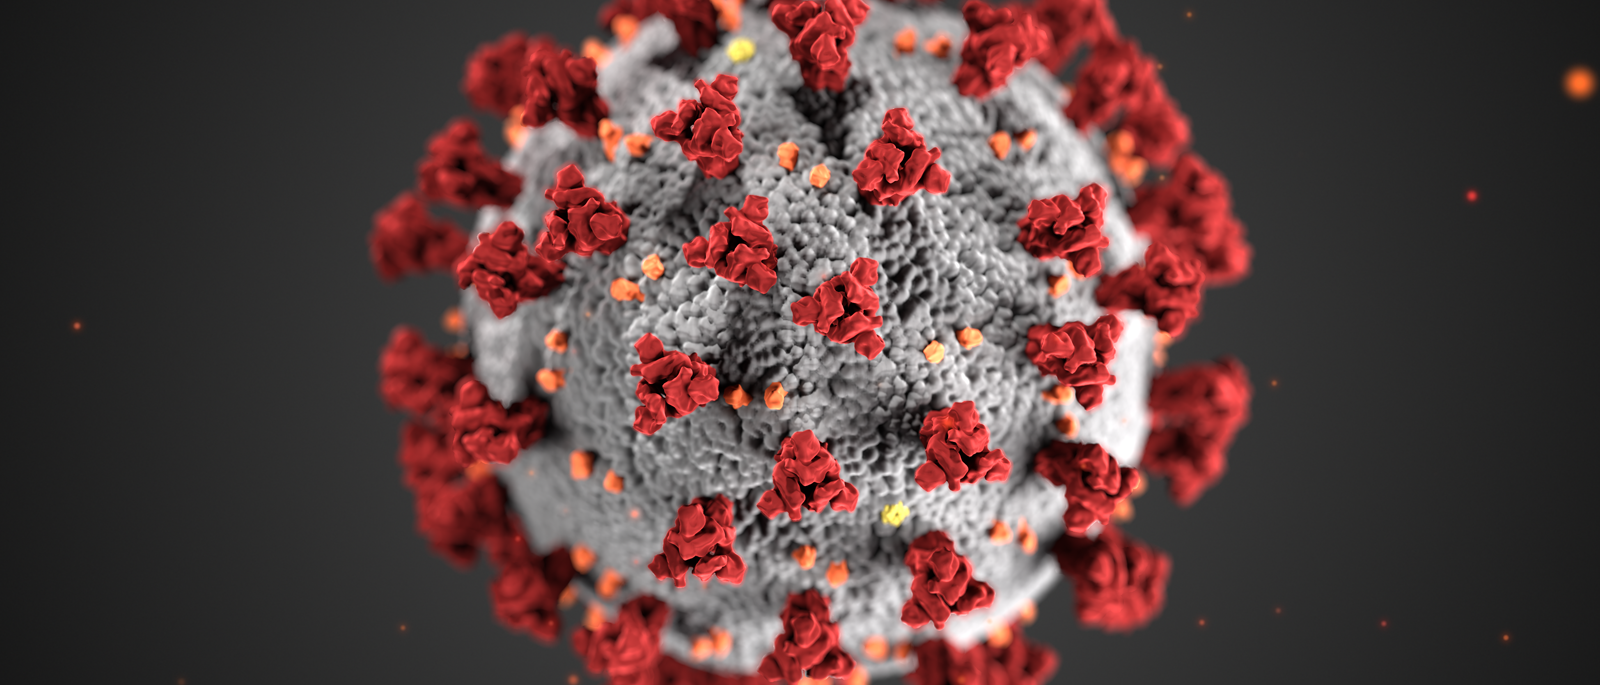 This illustration, created at the Centers for Disease Control and Prevention (CDC), reveals ultrastructural morphology exhibited by coronaviruses. Note the spikes that adorn the outer surface of the virus, which impart the look of a corona surrounding the virion, when viewed electron microscopically. A novel coronavirus, named Severe Acute Respiratory Syndrome Coronavirus 2 (SARS-CoV-2), was identified as the cause of an outbreak of respiratory illness named coronavirus disease 2019 (COVID-19).